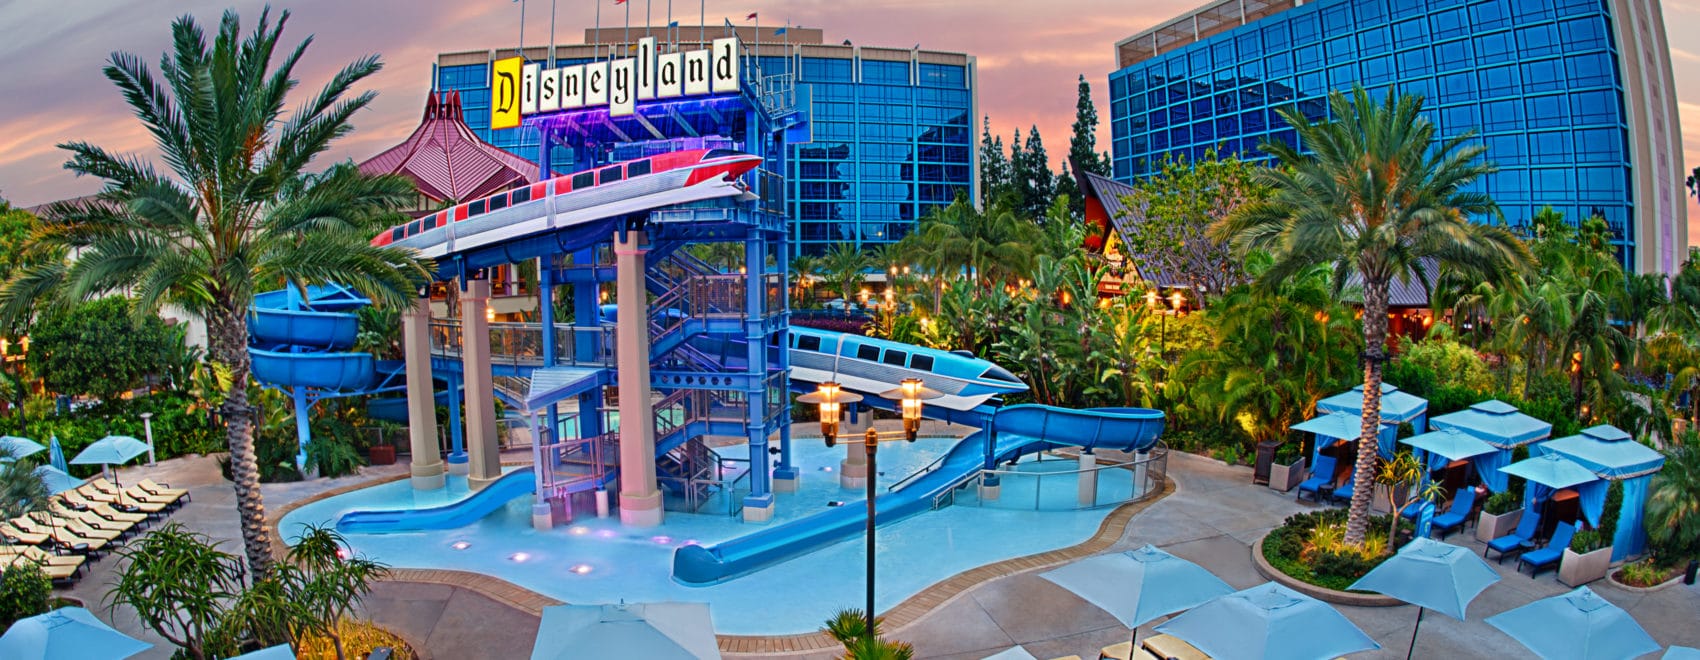 With a beckoning pool, lots of lounging areas, a monorail-themed water slide, the old-school original Disney style signage and the two beautiful blue towers that makeup the appealing outside property of the Disneyland Hotel, you can see why it's one of the best hotels near Disneyland for families vacationing in California.